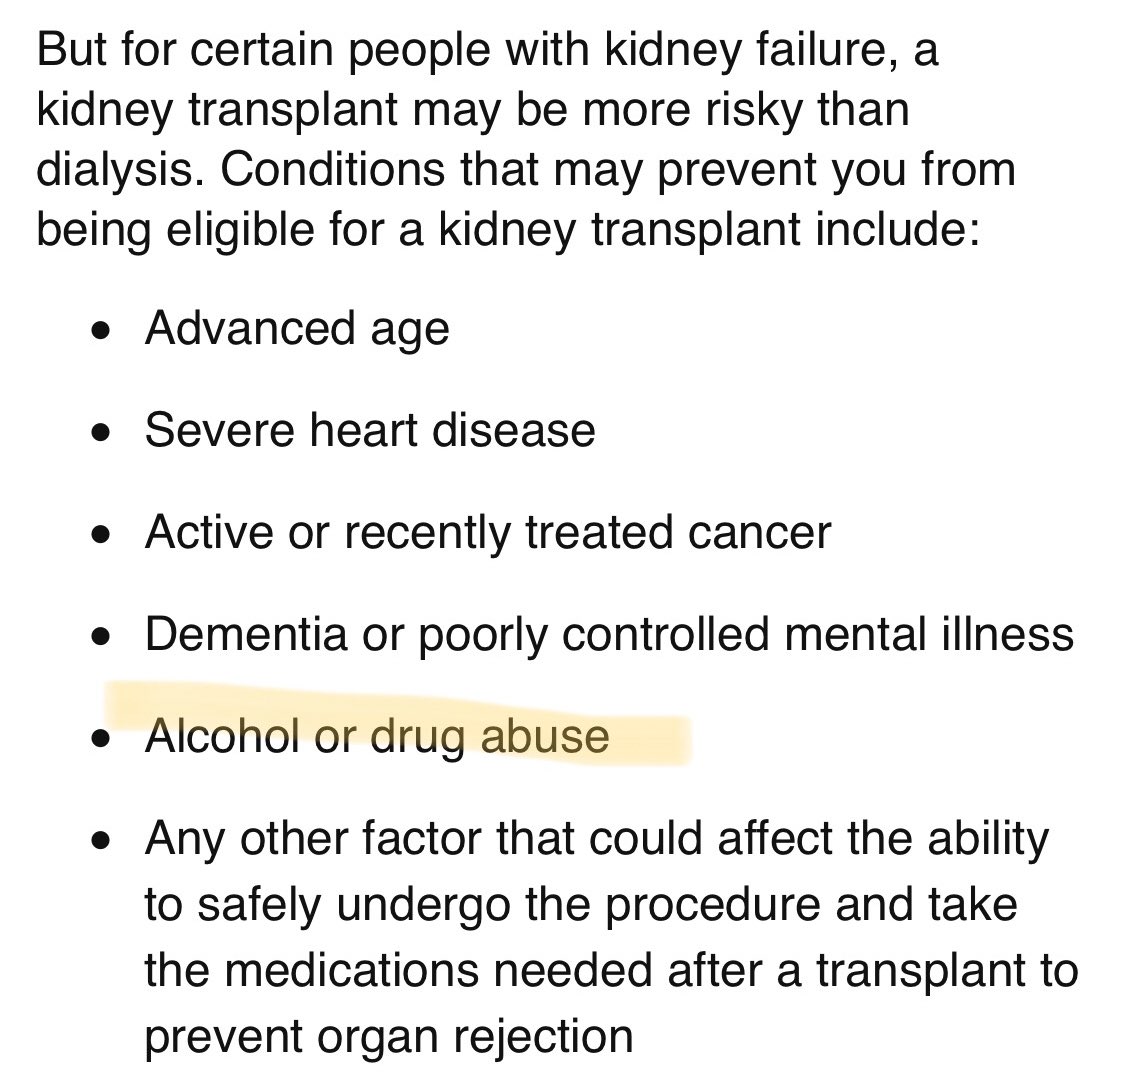 & then this. Why would a friend of hers & a transplant doctor spare a kidney on someone that is an “alcoholic?” We’re talking about a scarce organ that with any OVERUSE of drugs/alcohol can instantly fail and be fatal. Usually those recipients aren’t even considered for surgery.